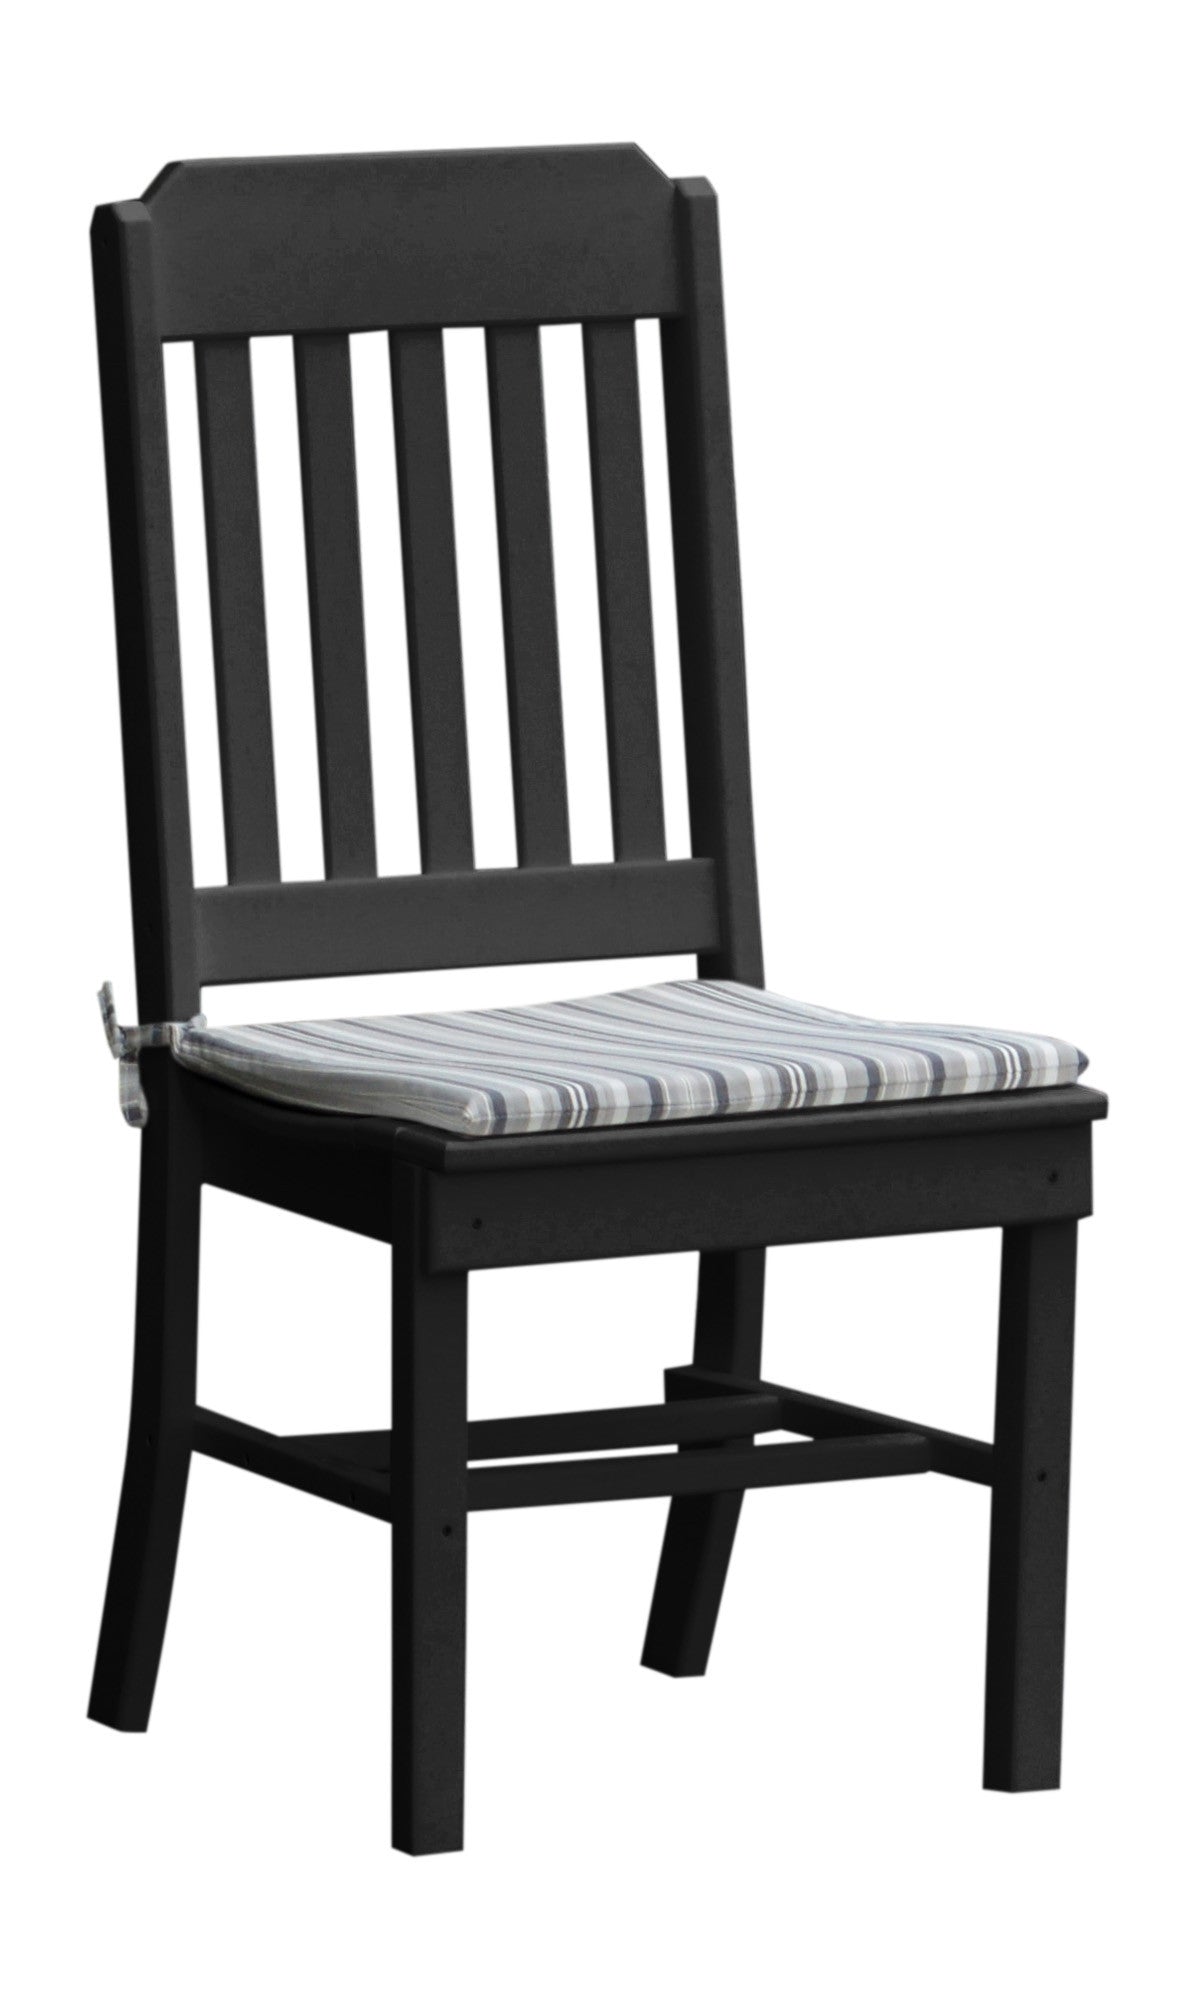 A&L Furniture Company Recycled Plastic Traditional Dining Chair - Black